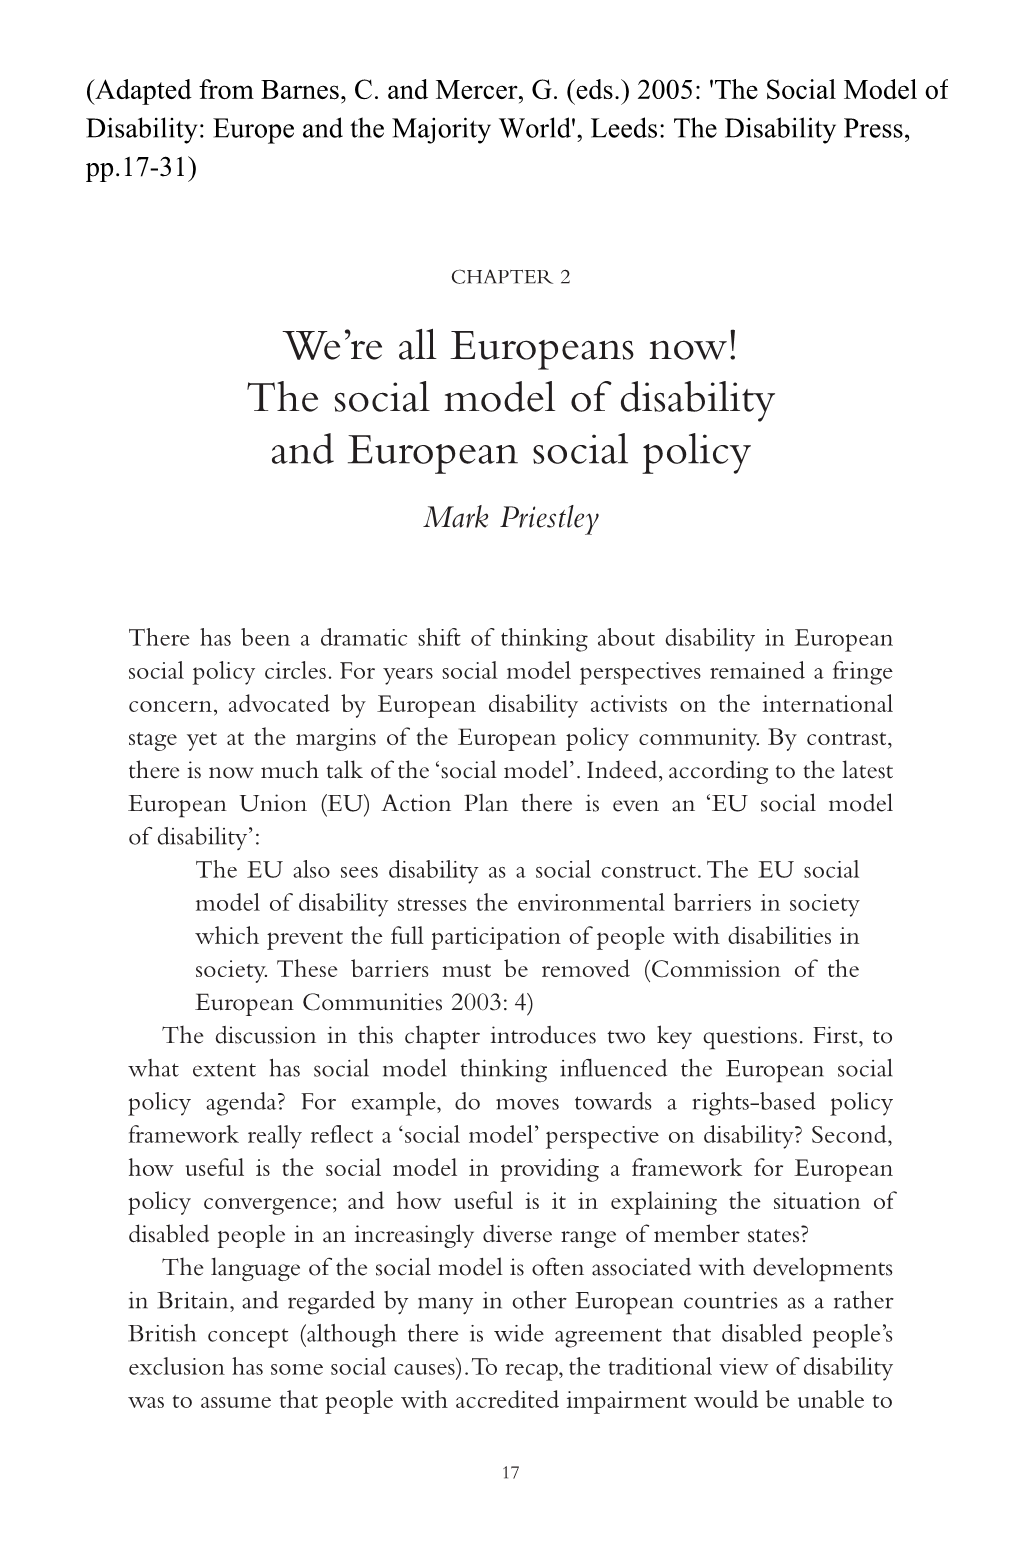 The Social Model of Disability and European Social Policy Mark Priestley